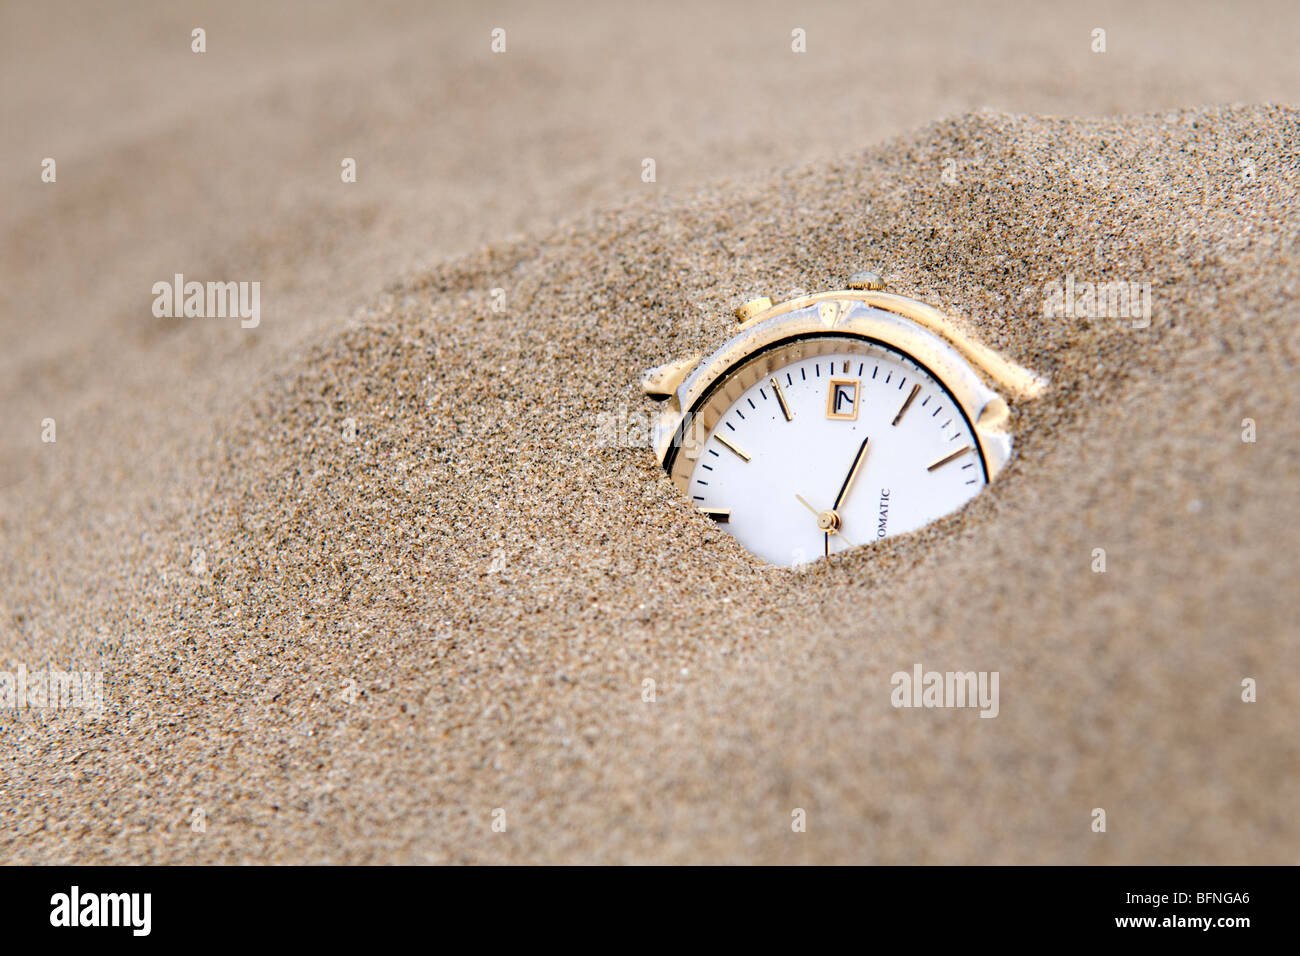 Buried watch in sand taken to depict the sands of time concept Stock Photo